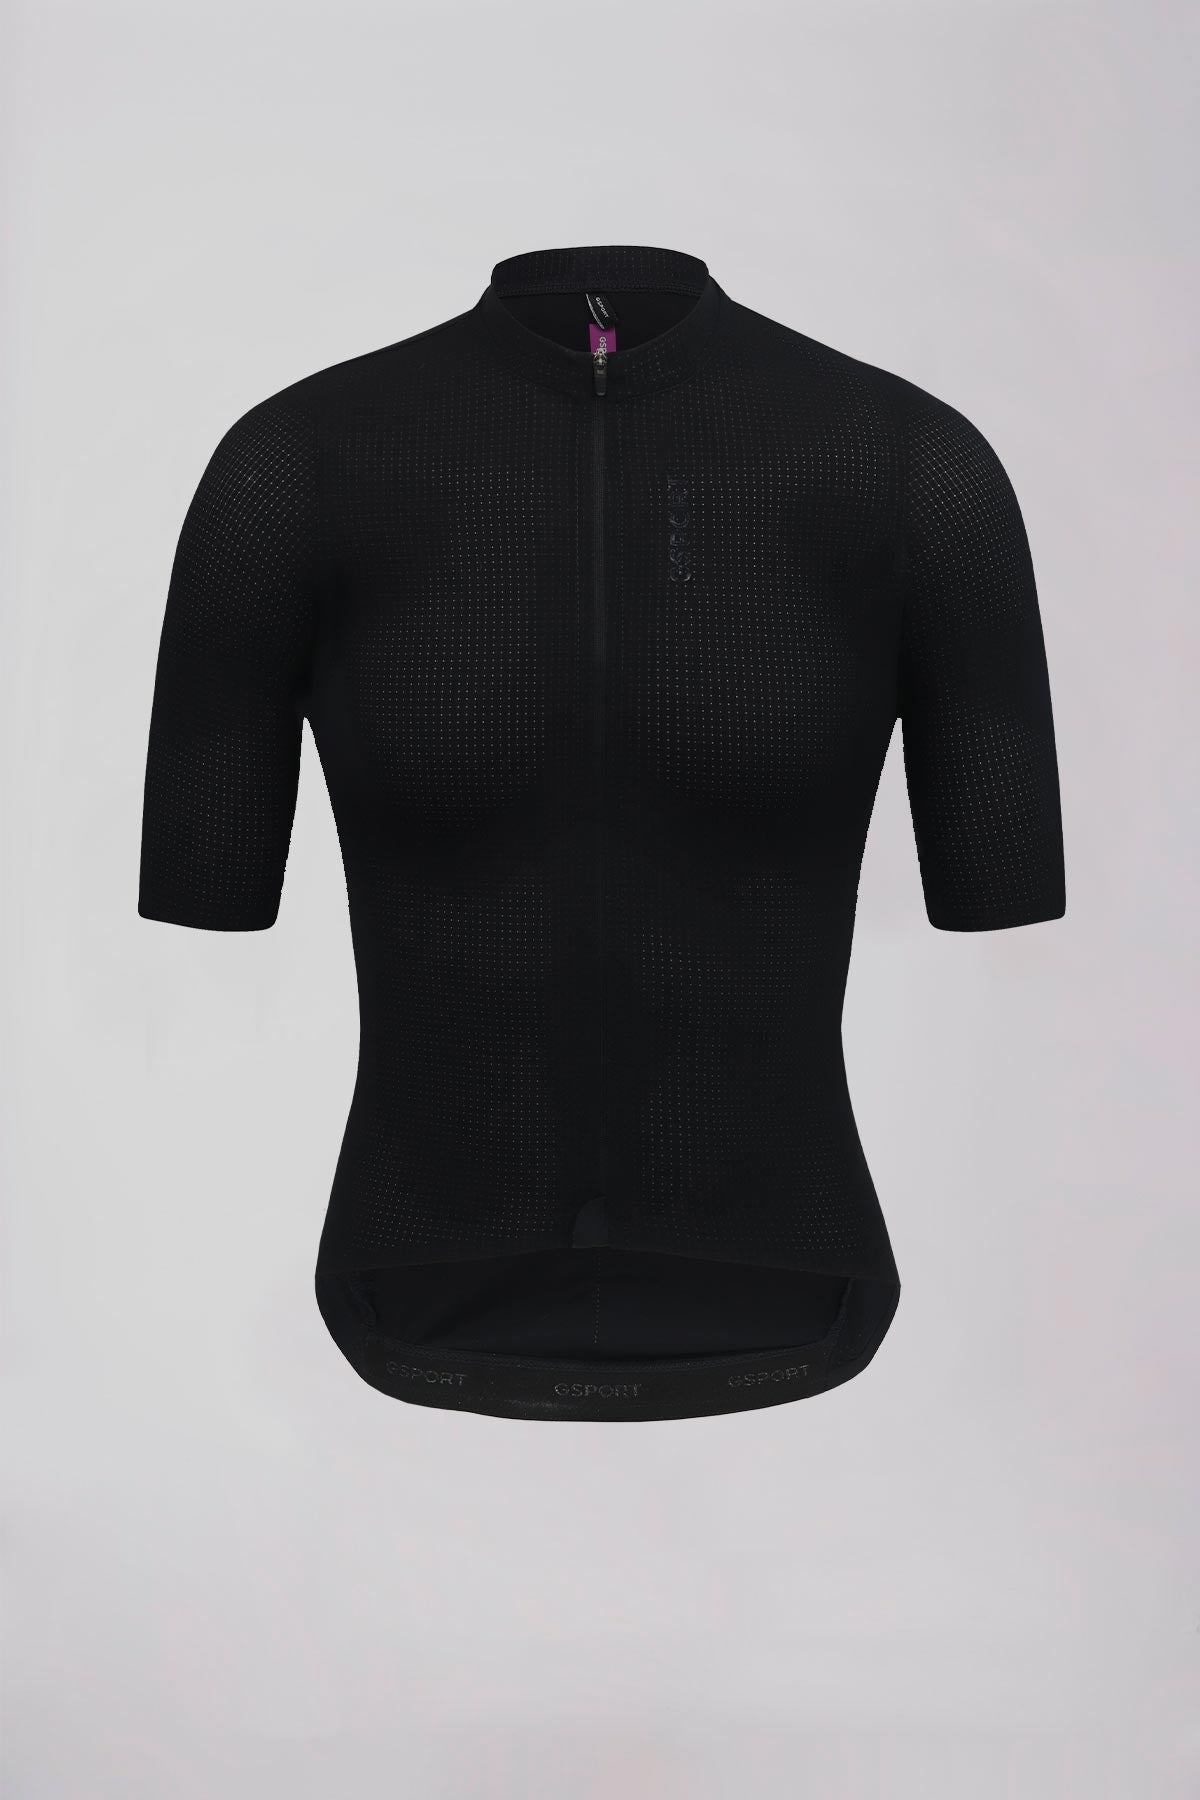 Maillot Pro Skin Carbon Mujer